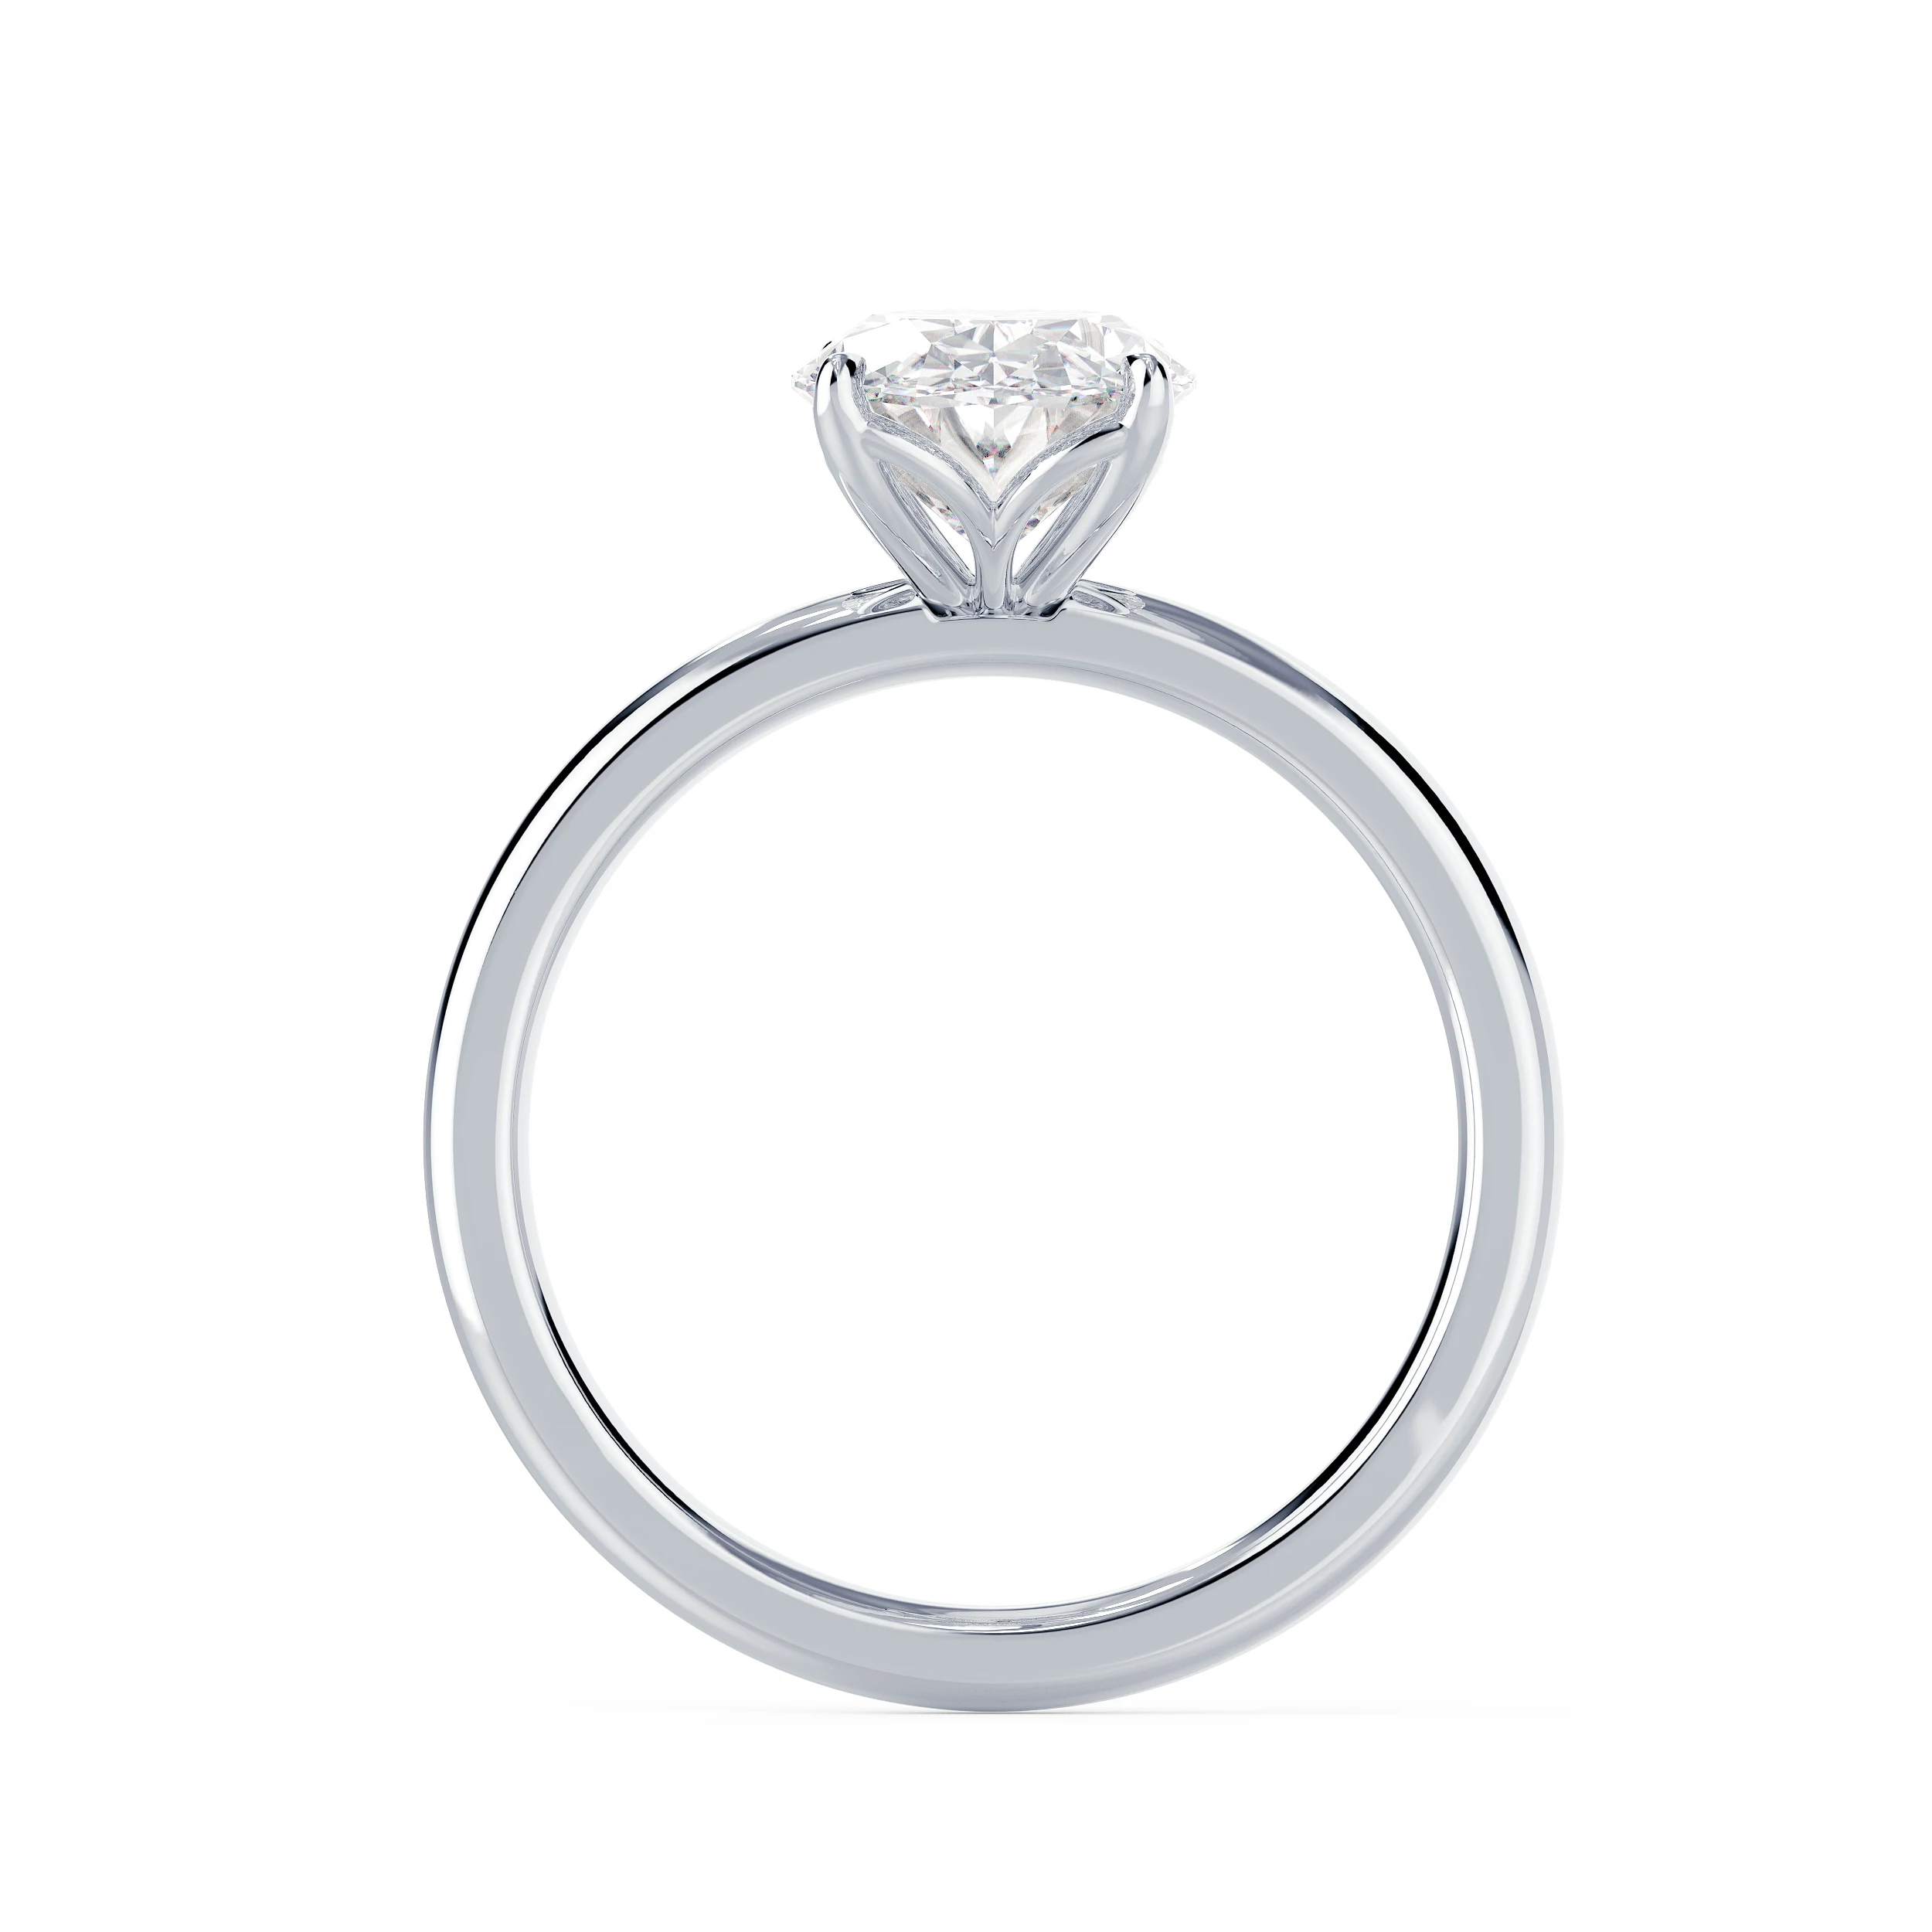 Hand Selected Man Made Diamonds set in White Gold Floral Basket Solitaire Diamond Engagement Ring (Profile View)